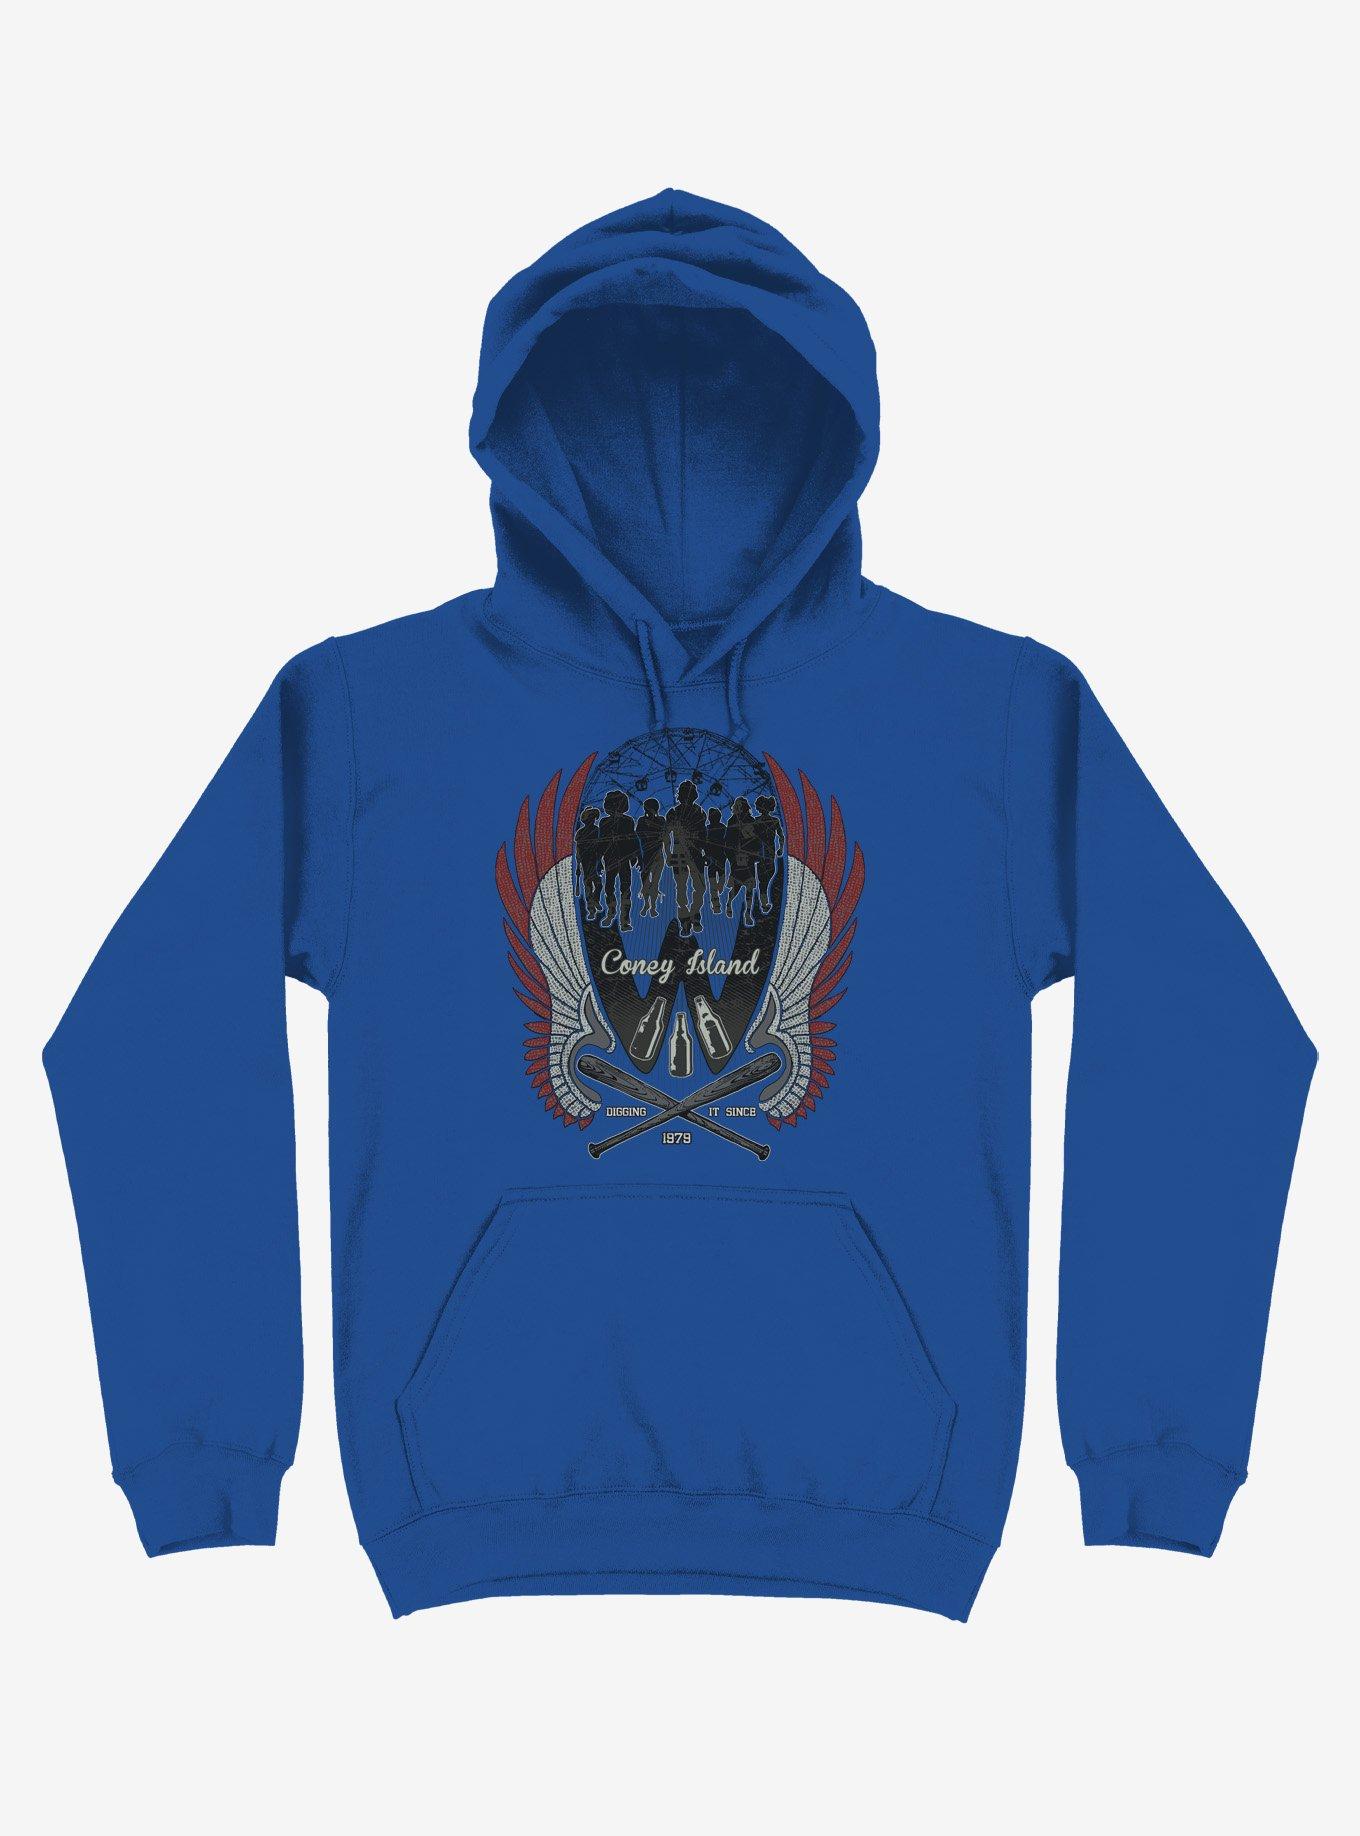 Warriors Are Home Coney Island Royal Blue Hoodie